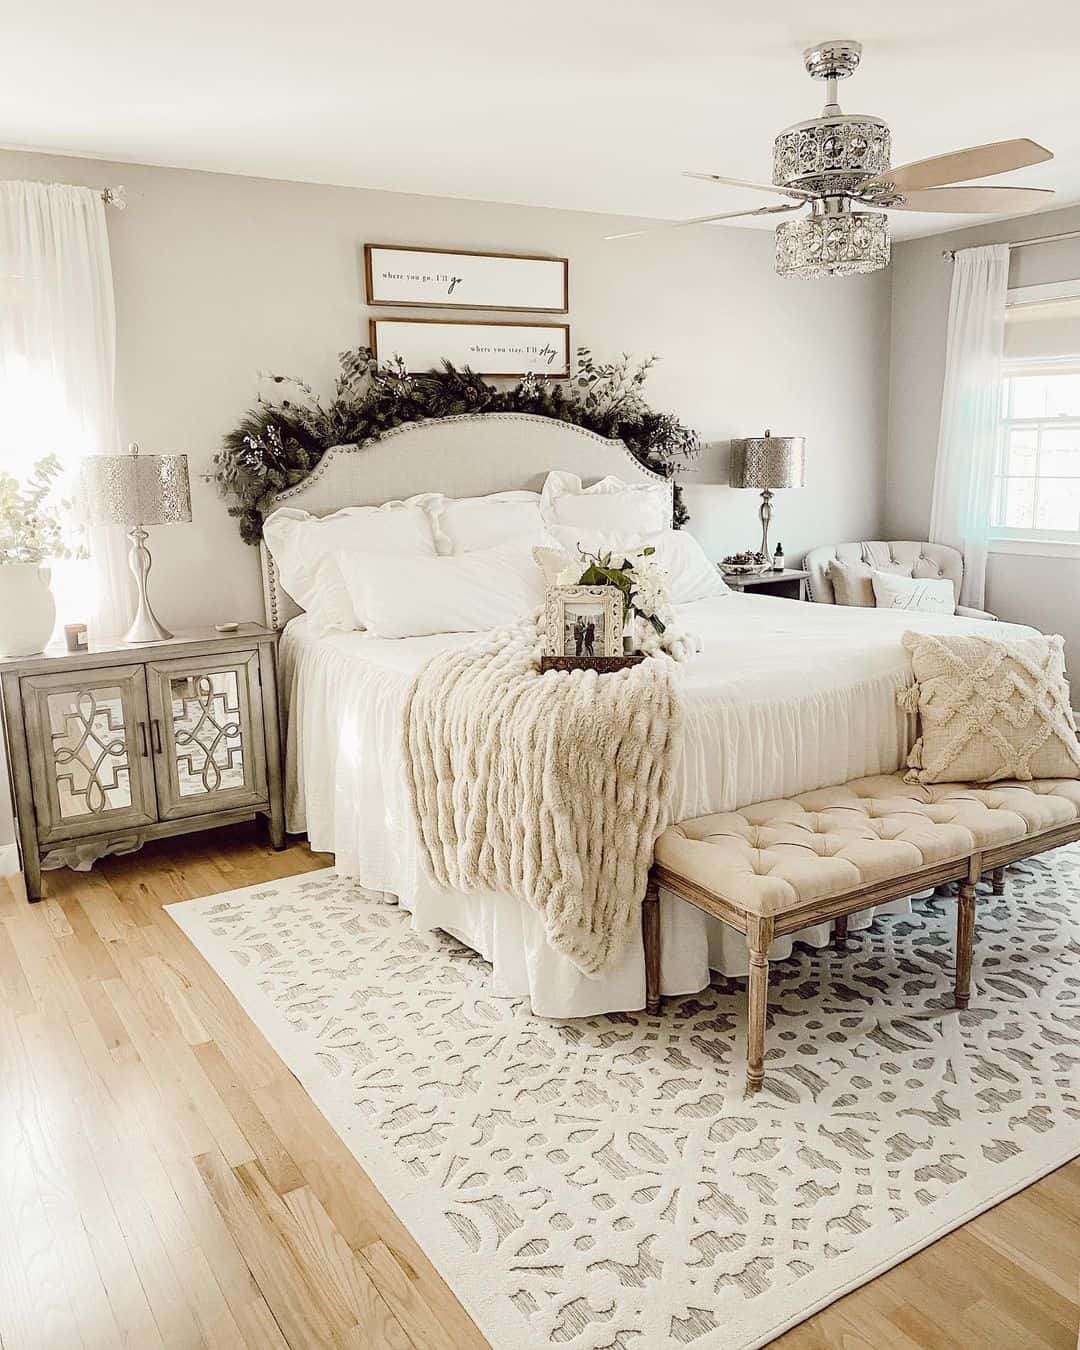 35 Wide Nightstands for an Unforgettable Farmhouse Bedroom